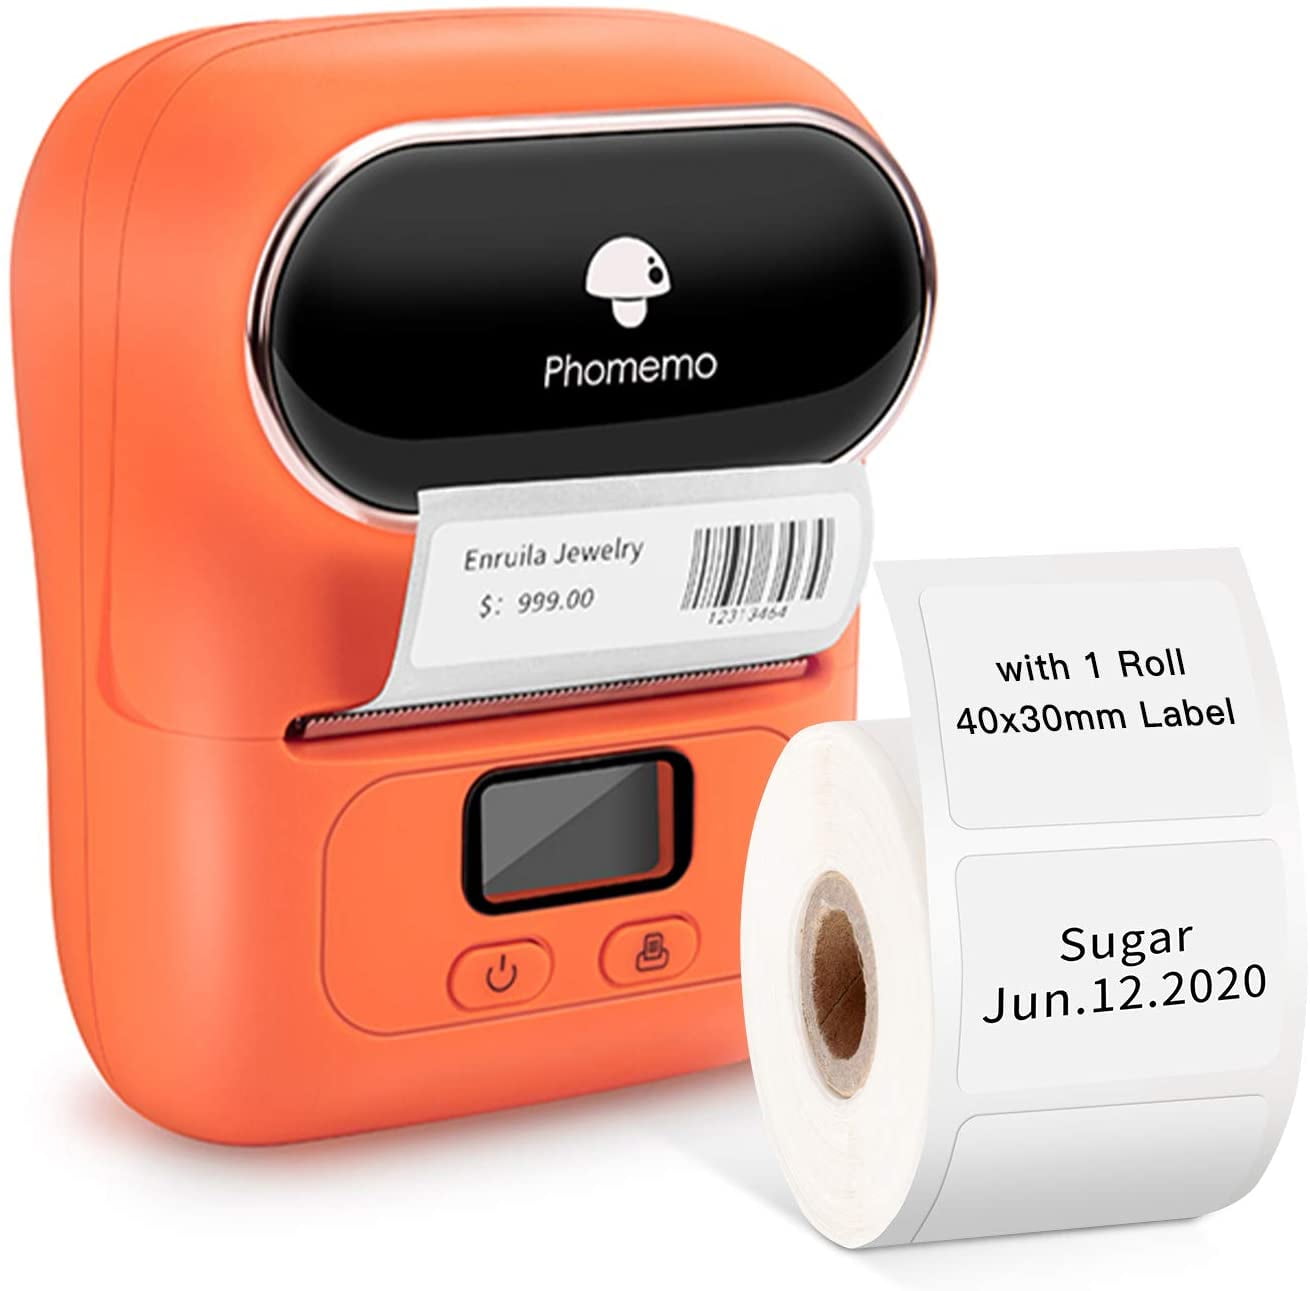 Phomemo M110 Bluetooth Thermal Label Maker for Android iOS Windows MAC OS